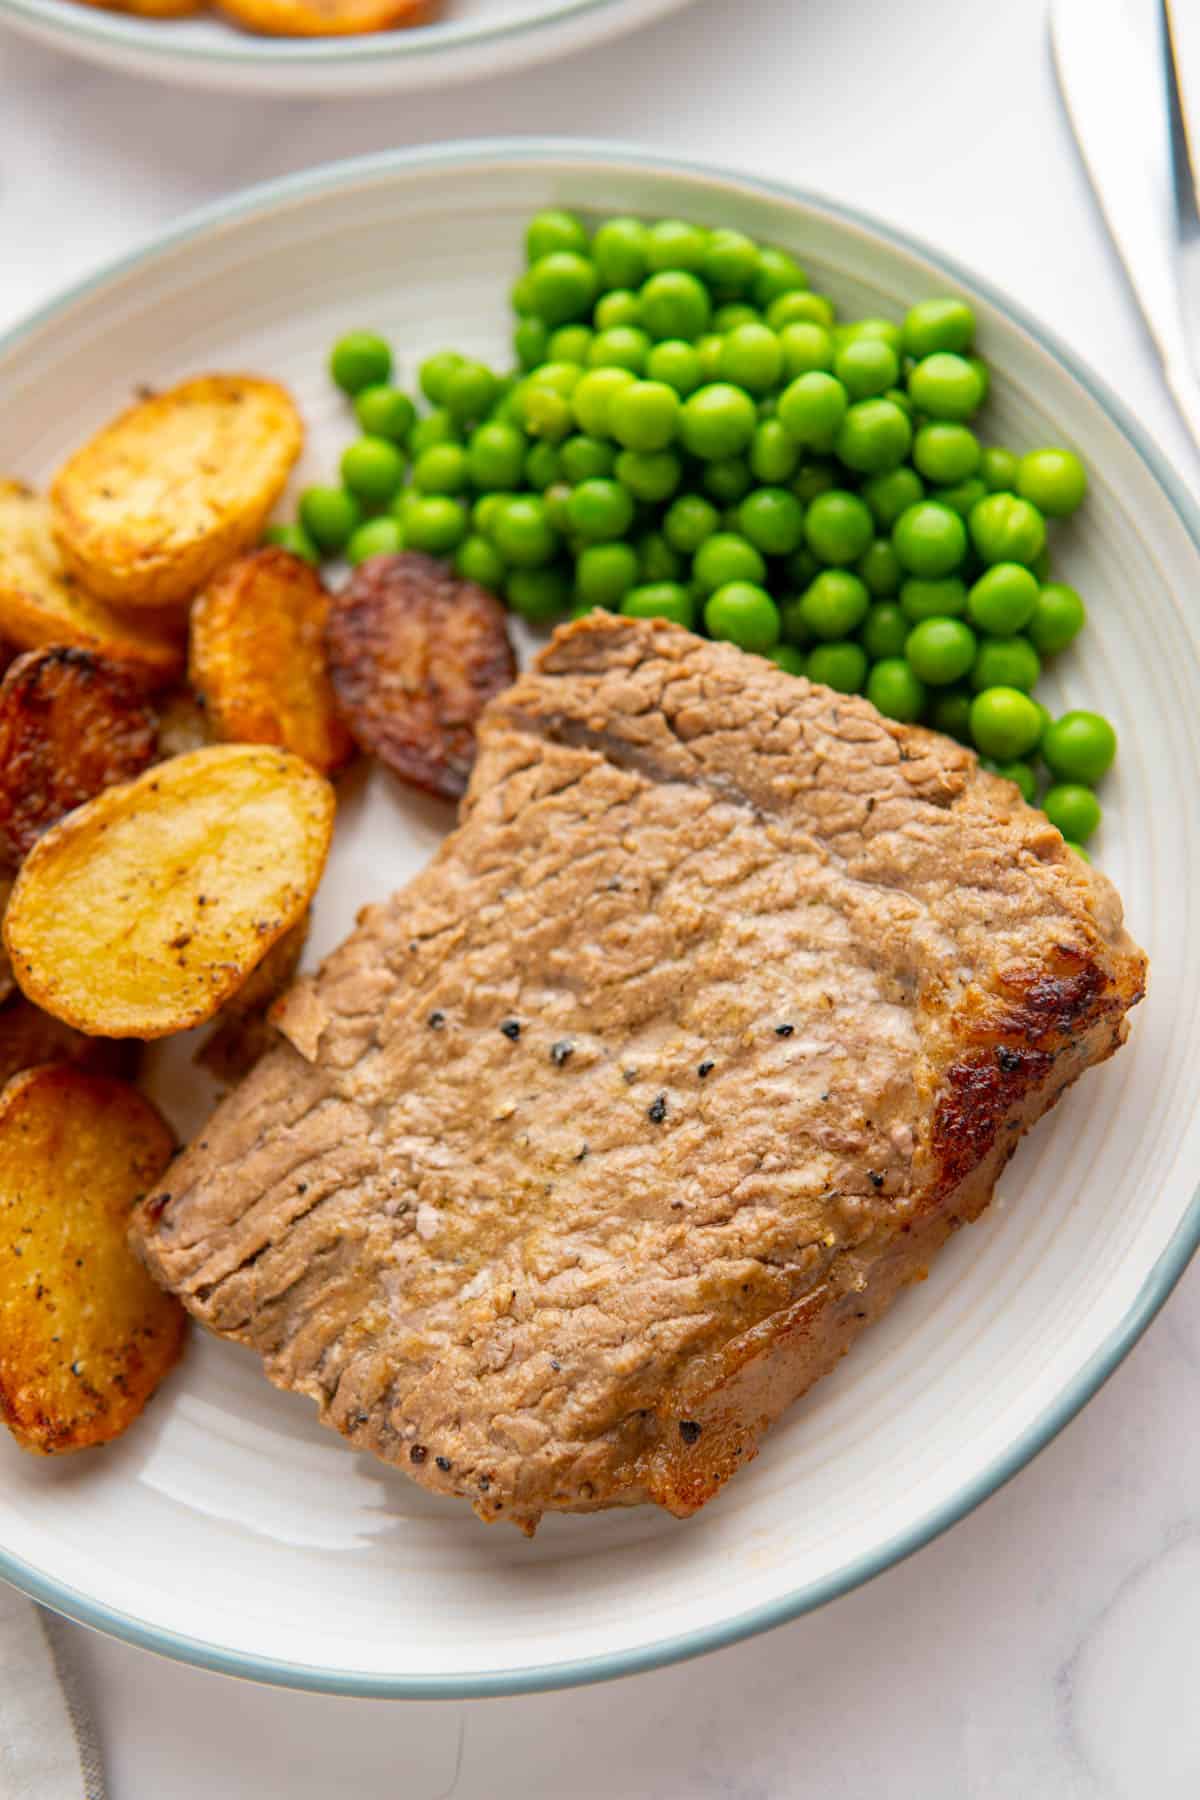 Close up on the marinated cube steak served on a plate with peas and roasted baby potatoes.